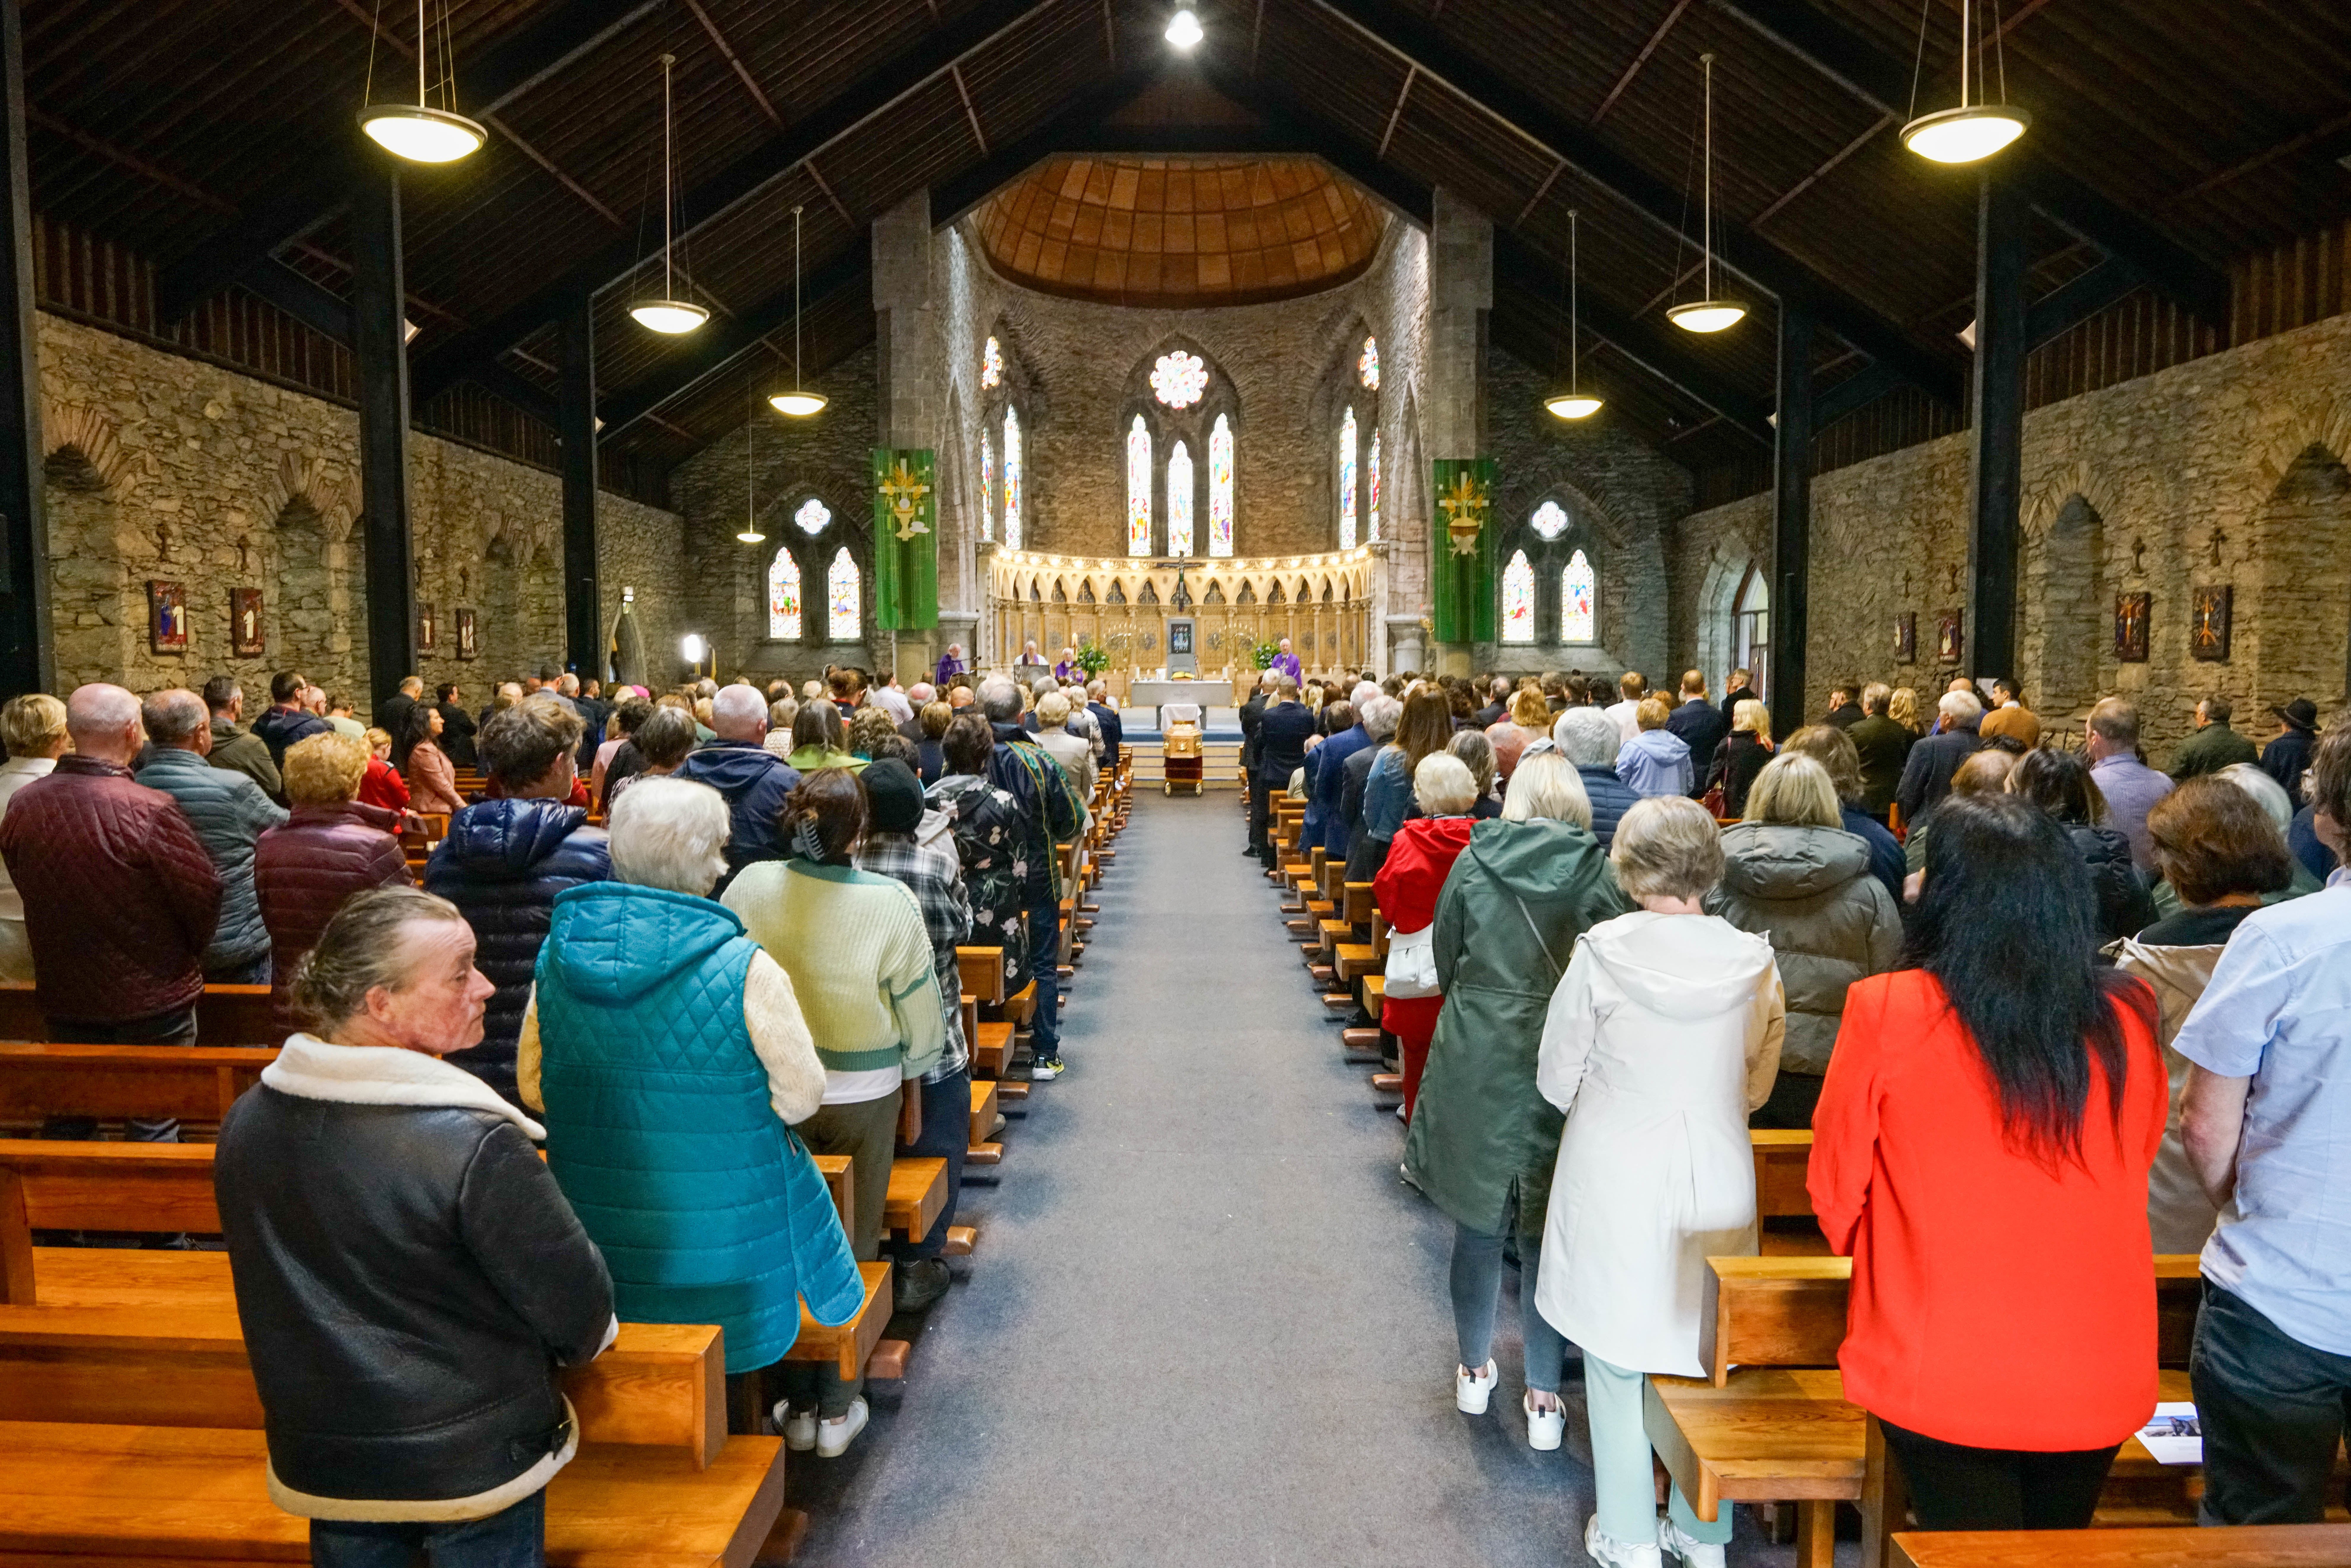 The congregation during the funeral for renowned Gaelic games commentator Micheal O Muircheartaigh at St Mary’s Church in Dingle, Co Kerry (Noel Sweeney/PA)